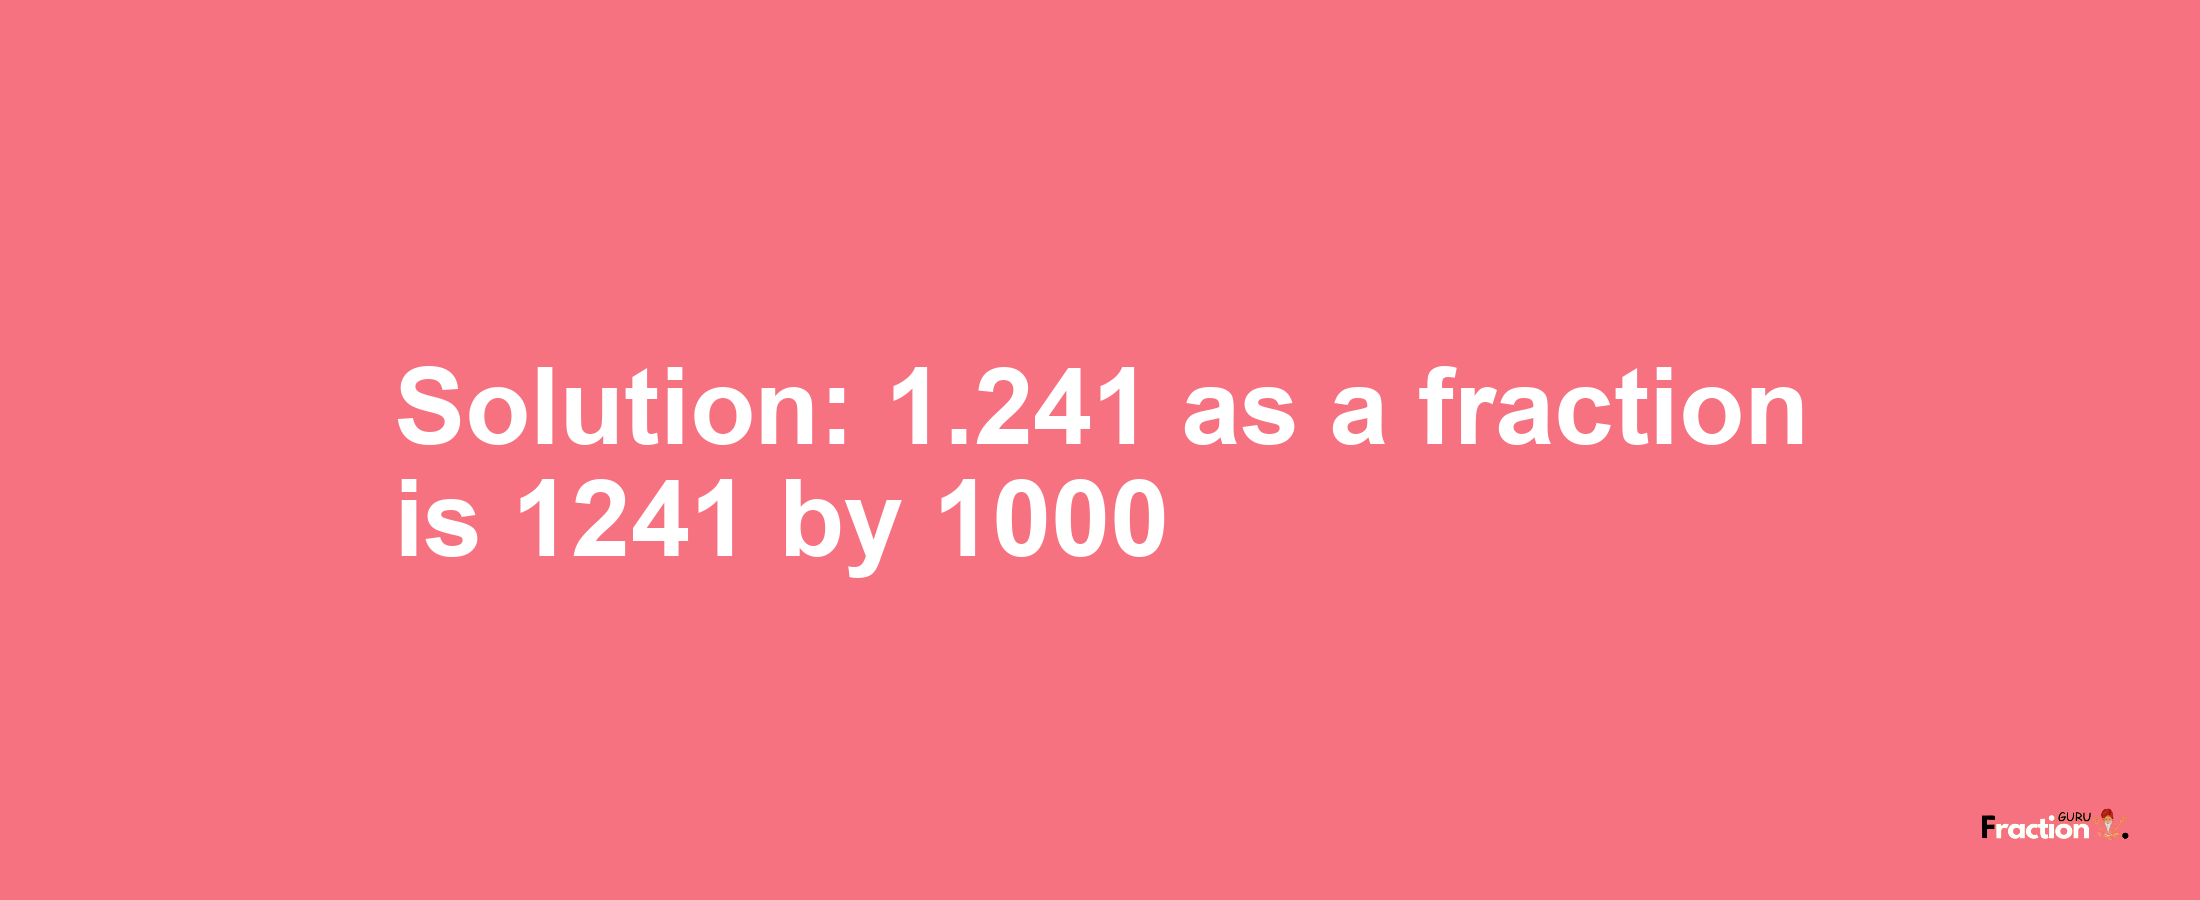 Solution:1.241 as a fraction is 1241/1000